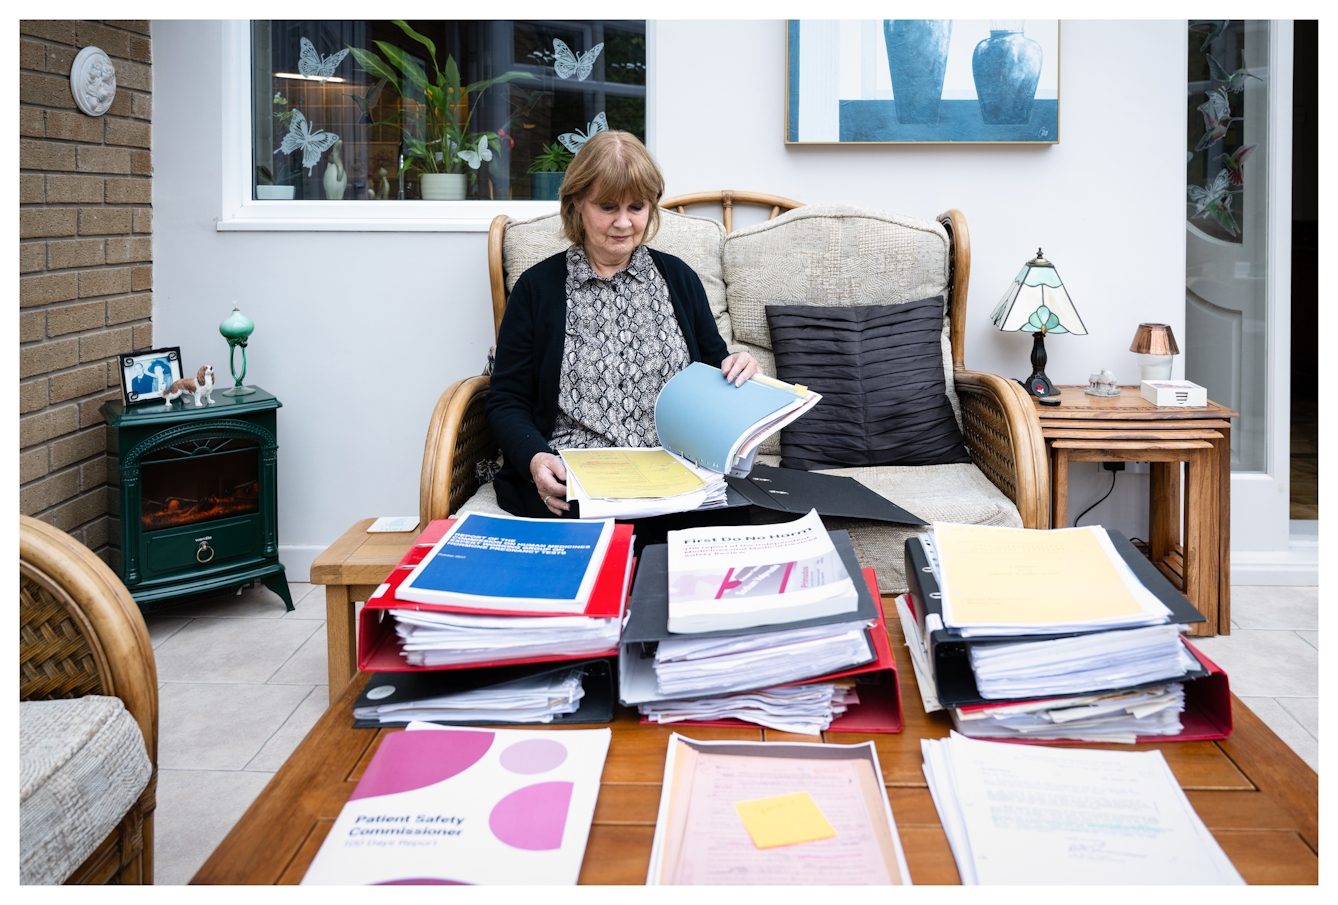 Photograph of Marie Lyon sat on a sofa in her conservatory. She is leafing through a lever arch file on he lap, full of documents. In front of her on the coffee table are 3 piles of lever arch files, papers and printed reports.